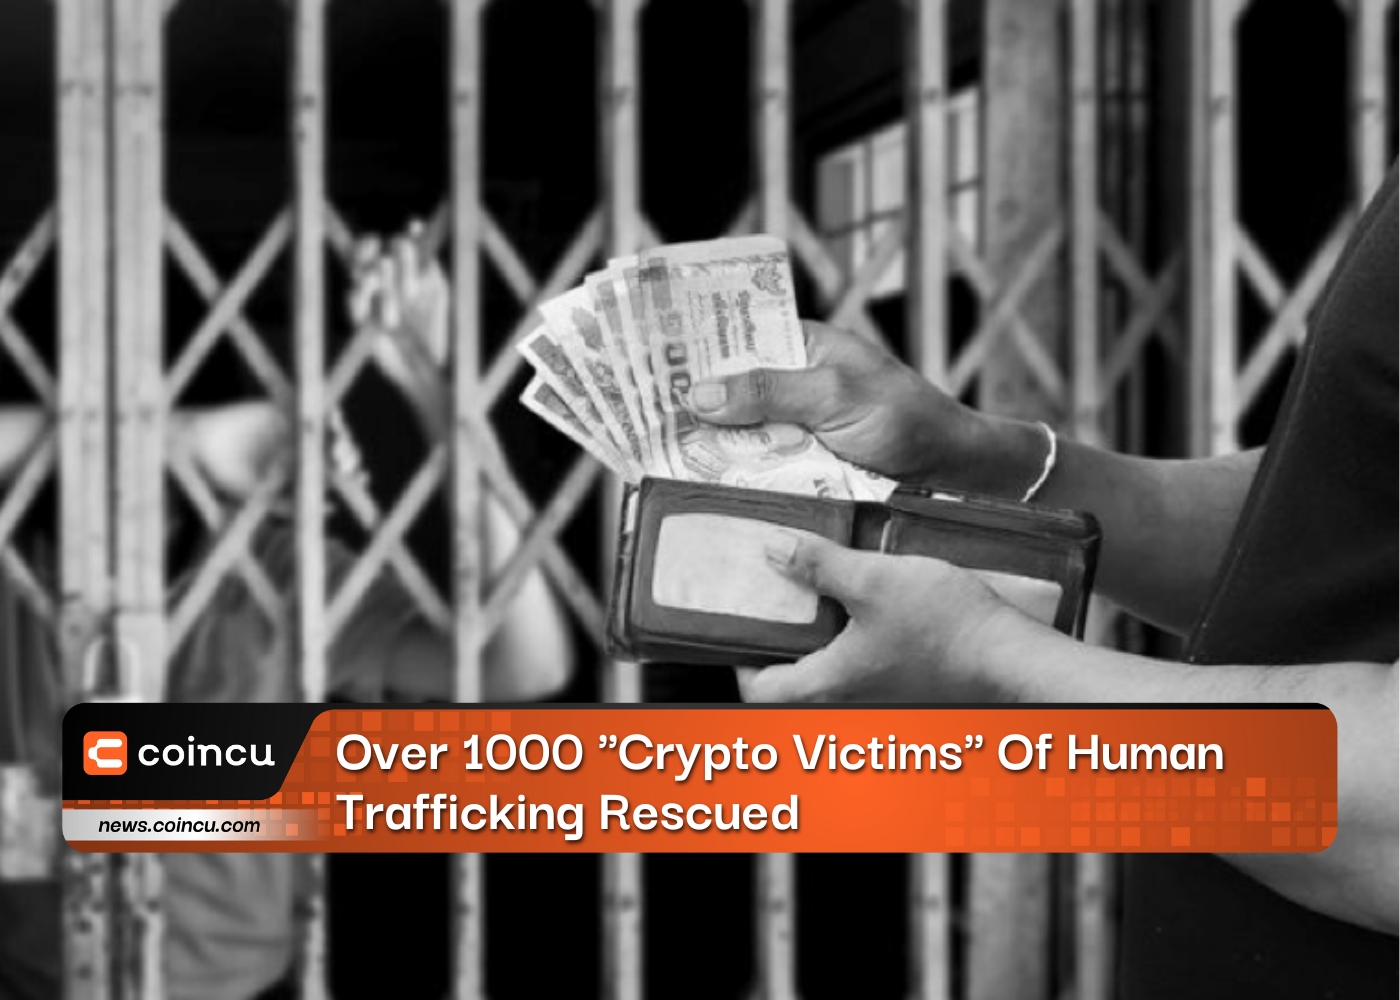 Over 1000 "Crypto Victims" Of Human Trafficking Rescued